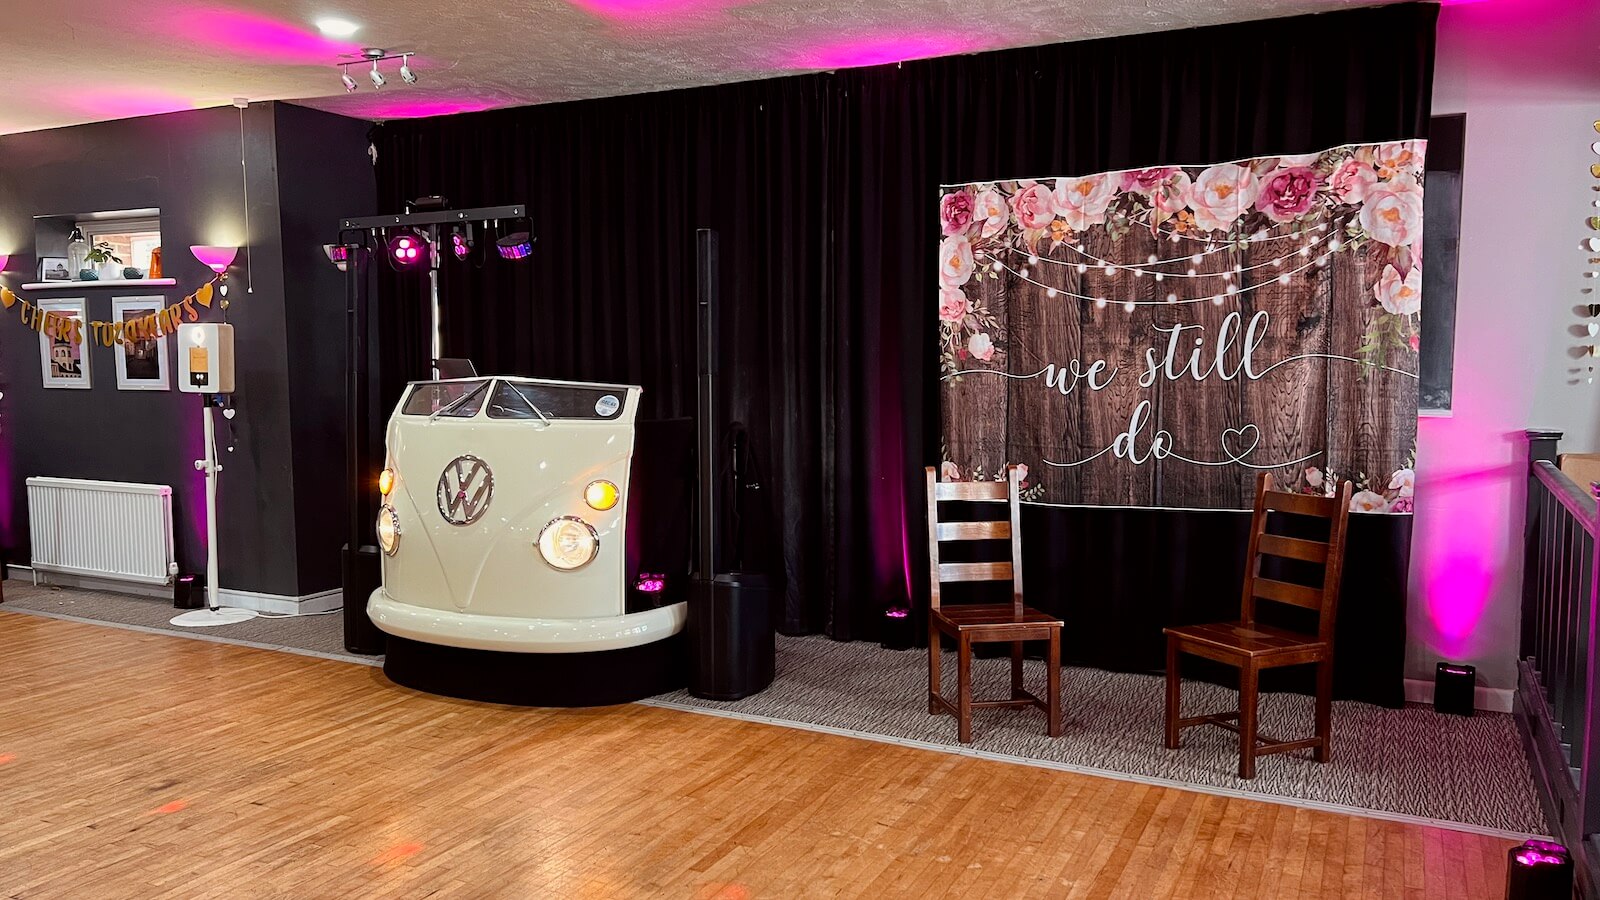 my VW DJ booth and Photopod set up at the TMG Social Club in Worthing